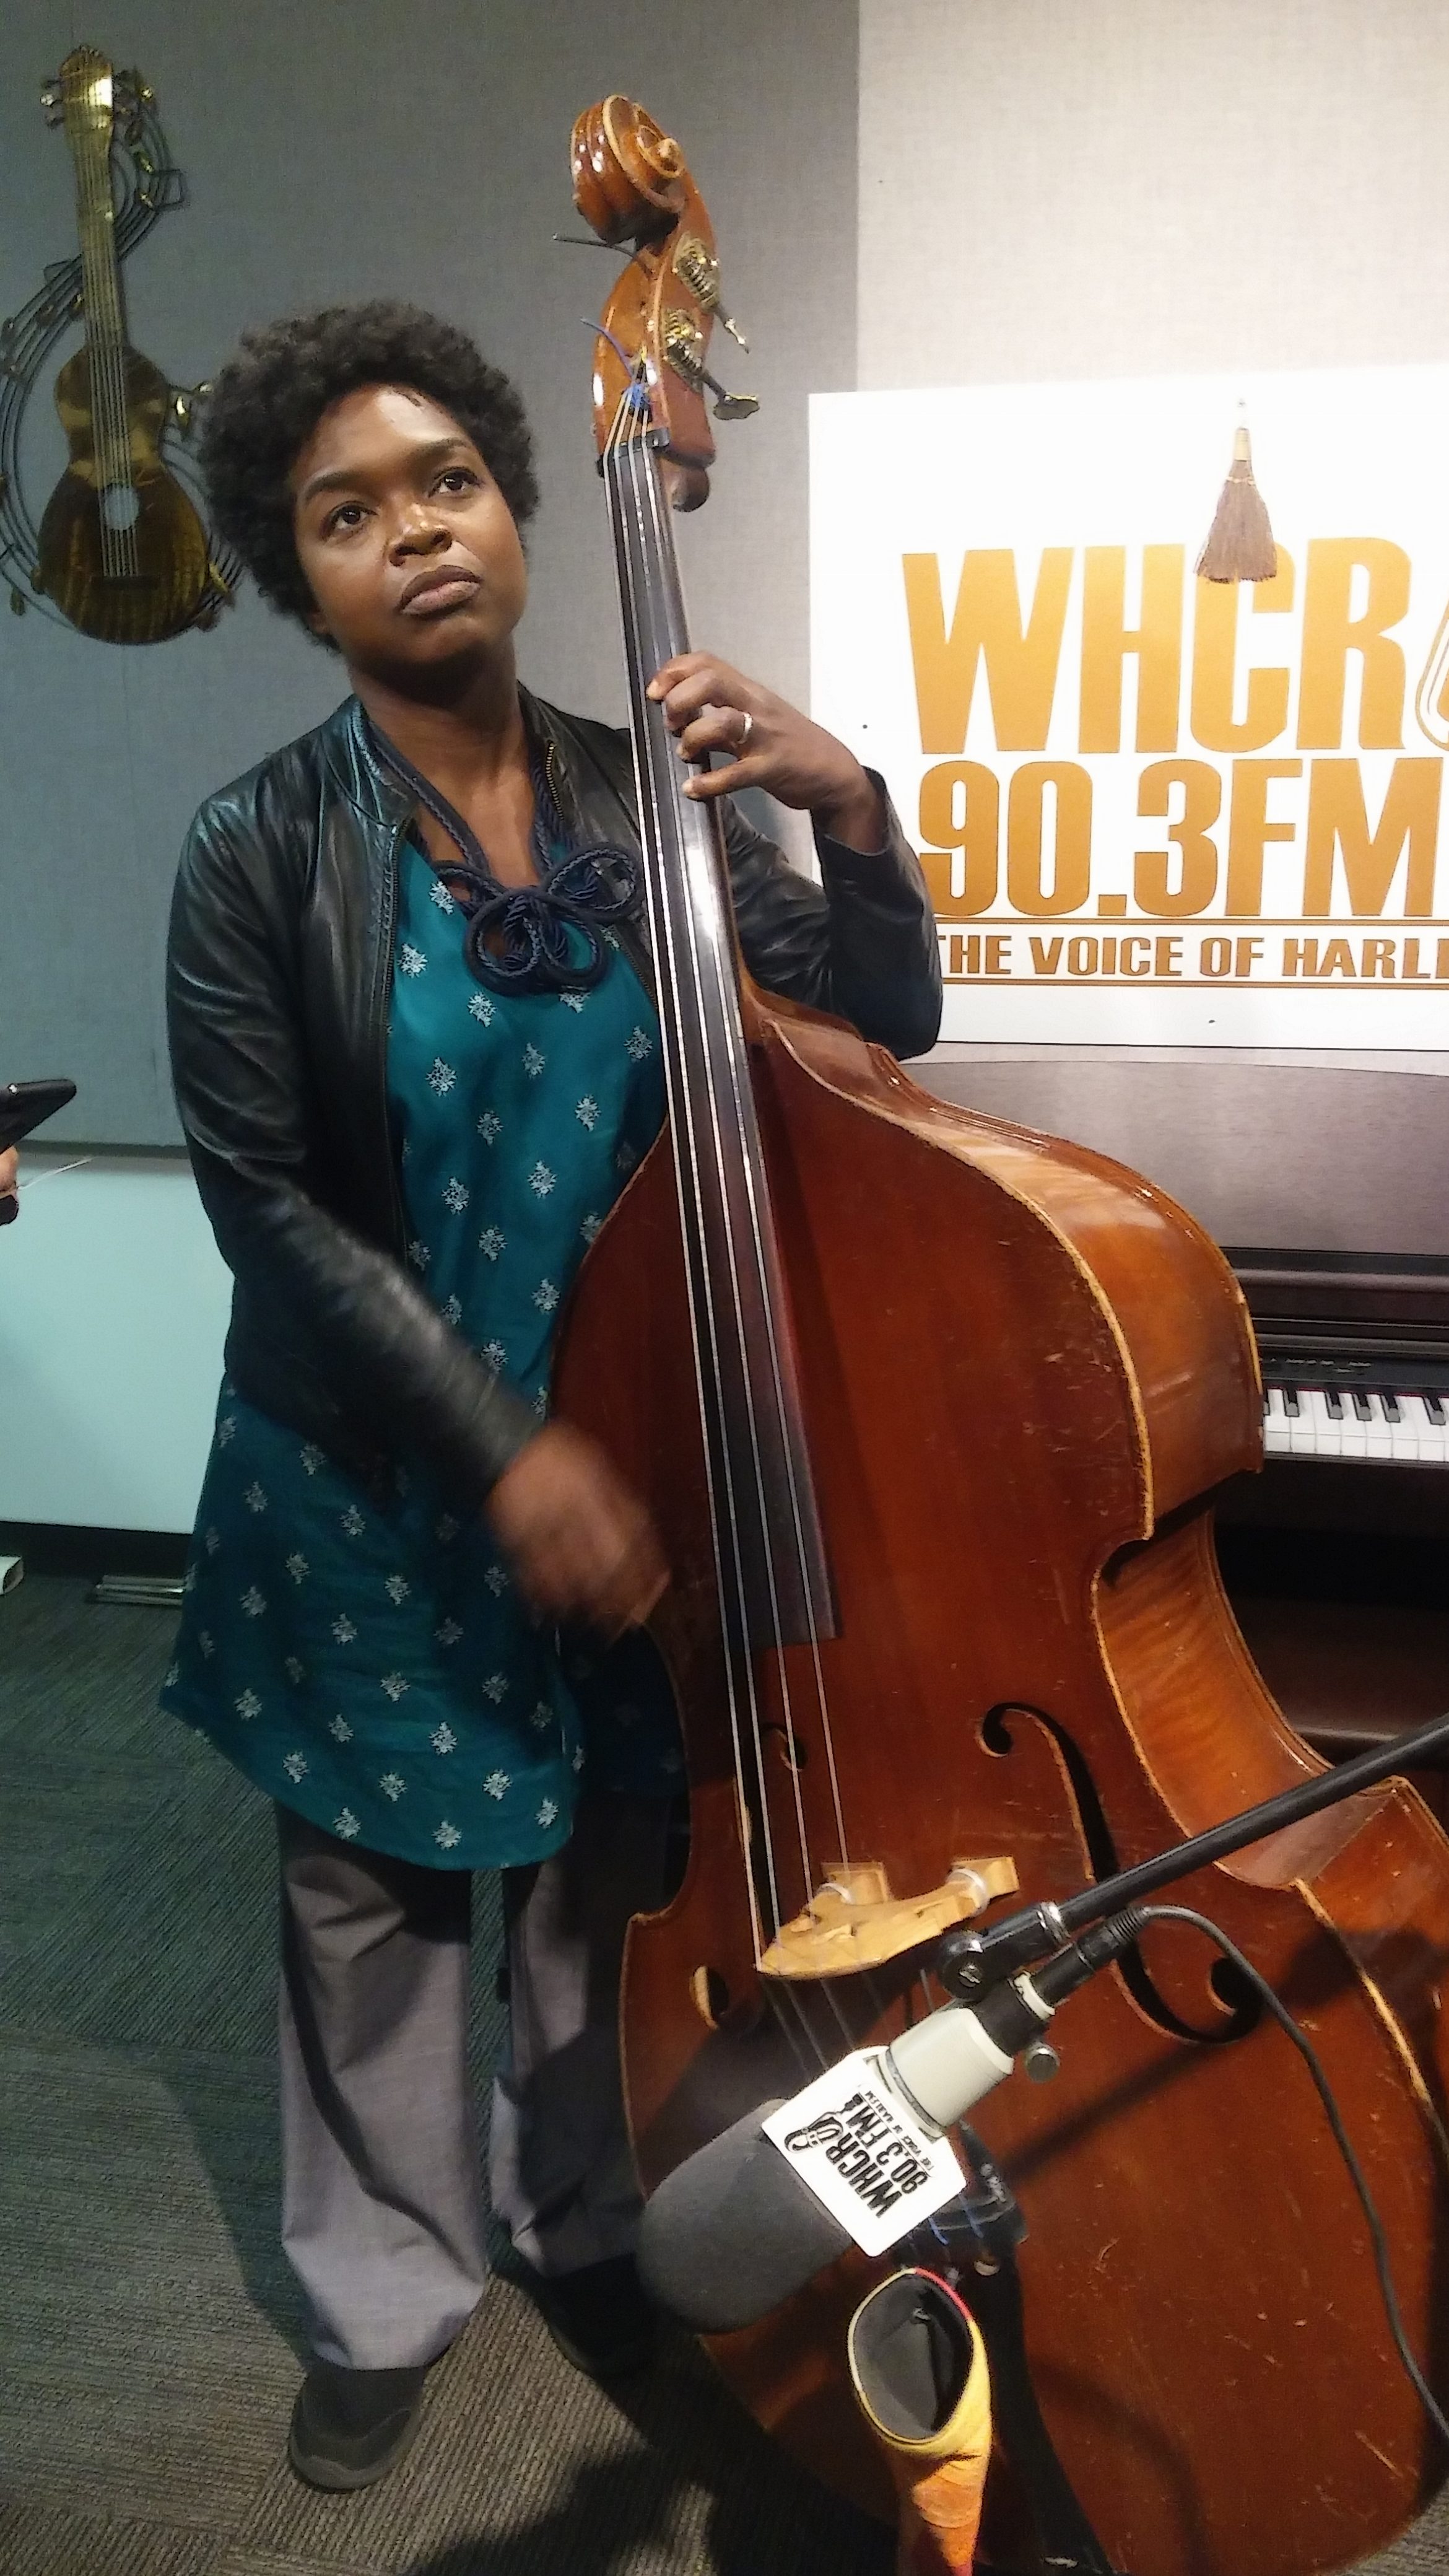 NEA Jazz Masters Breakfast at 90.3FM/NY WHCR - One person playing musical instruments